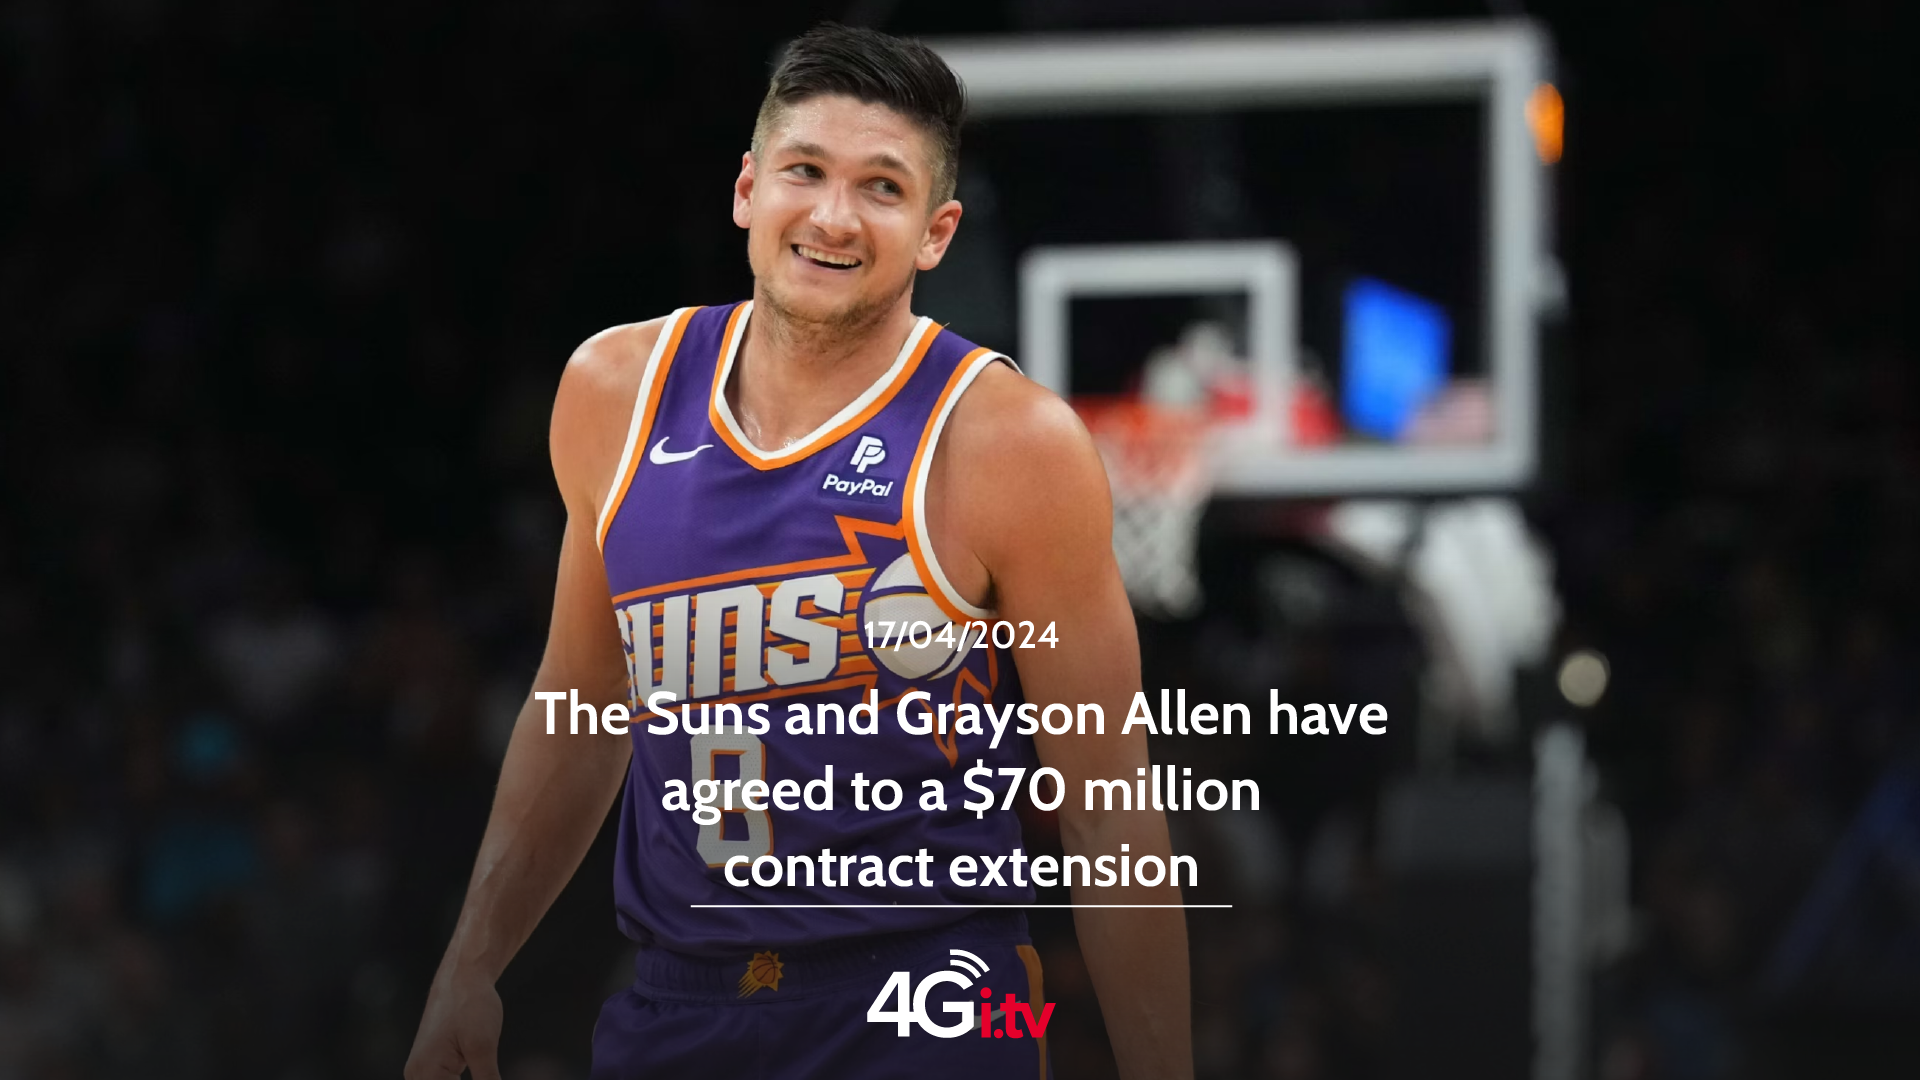 Подробнее о статье The Suns and Grayson Allen have agreed to a $70 million contract extension